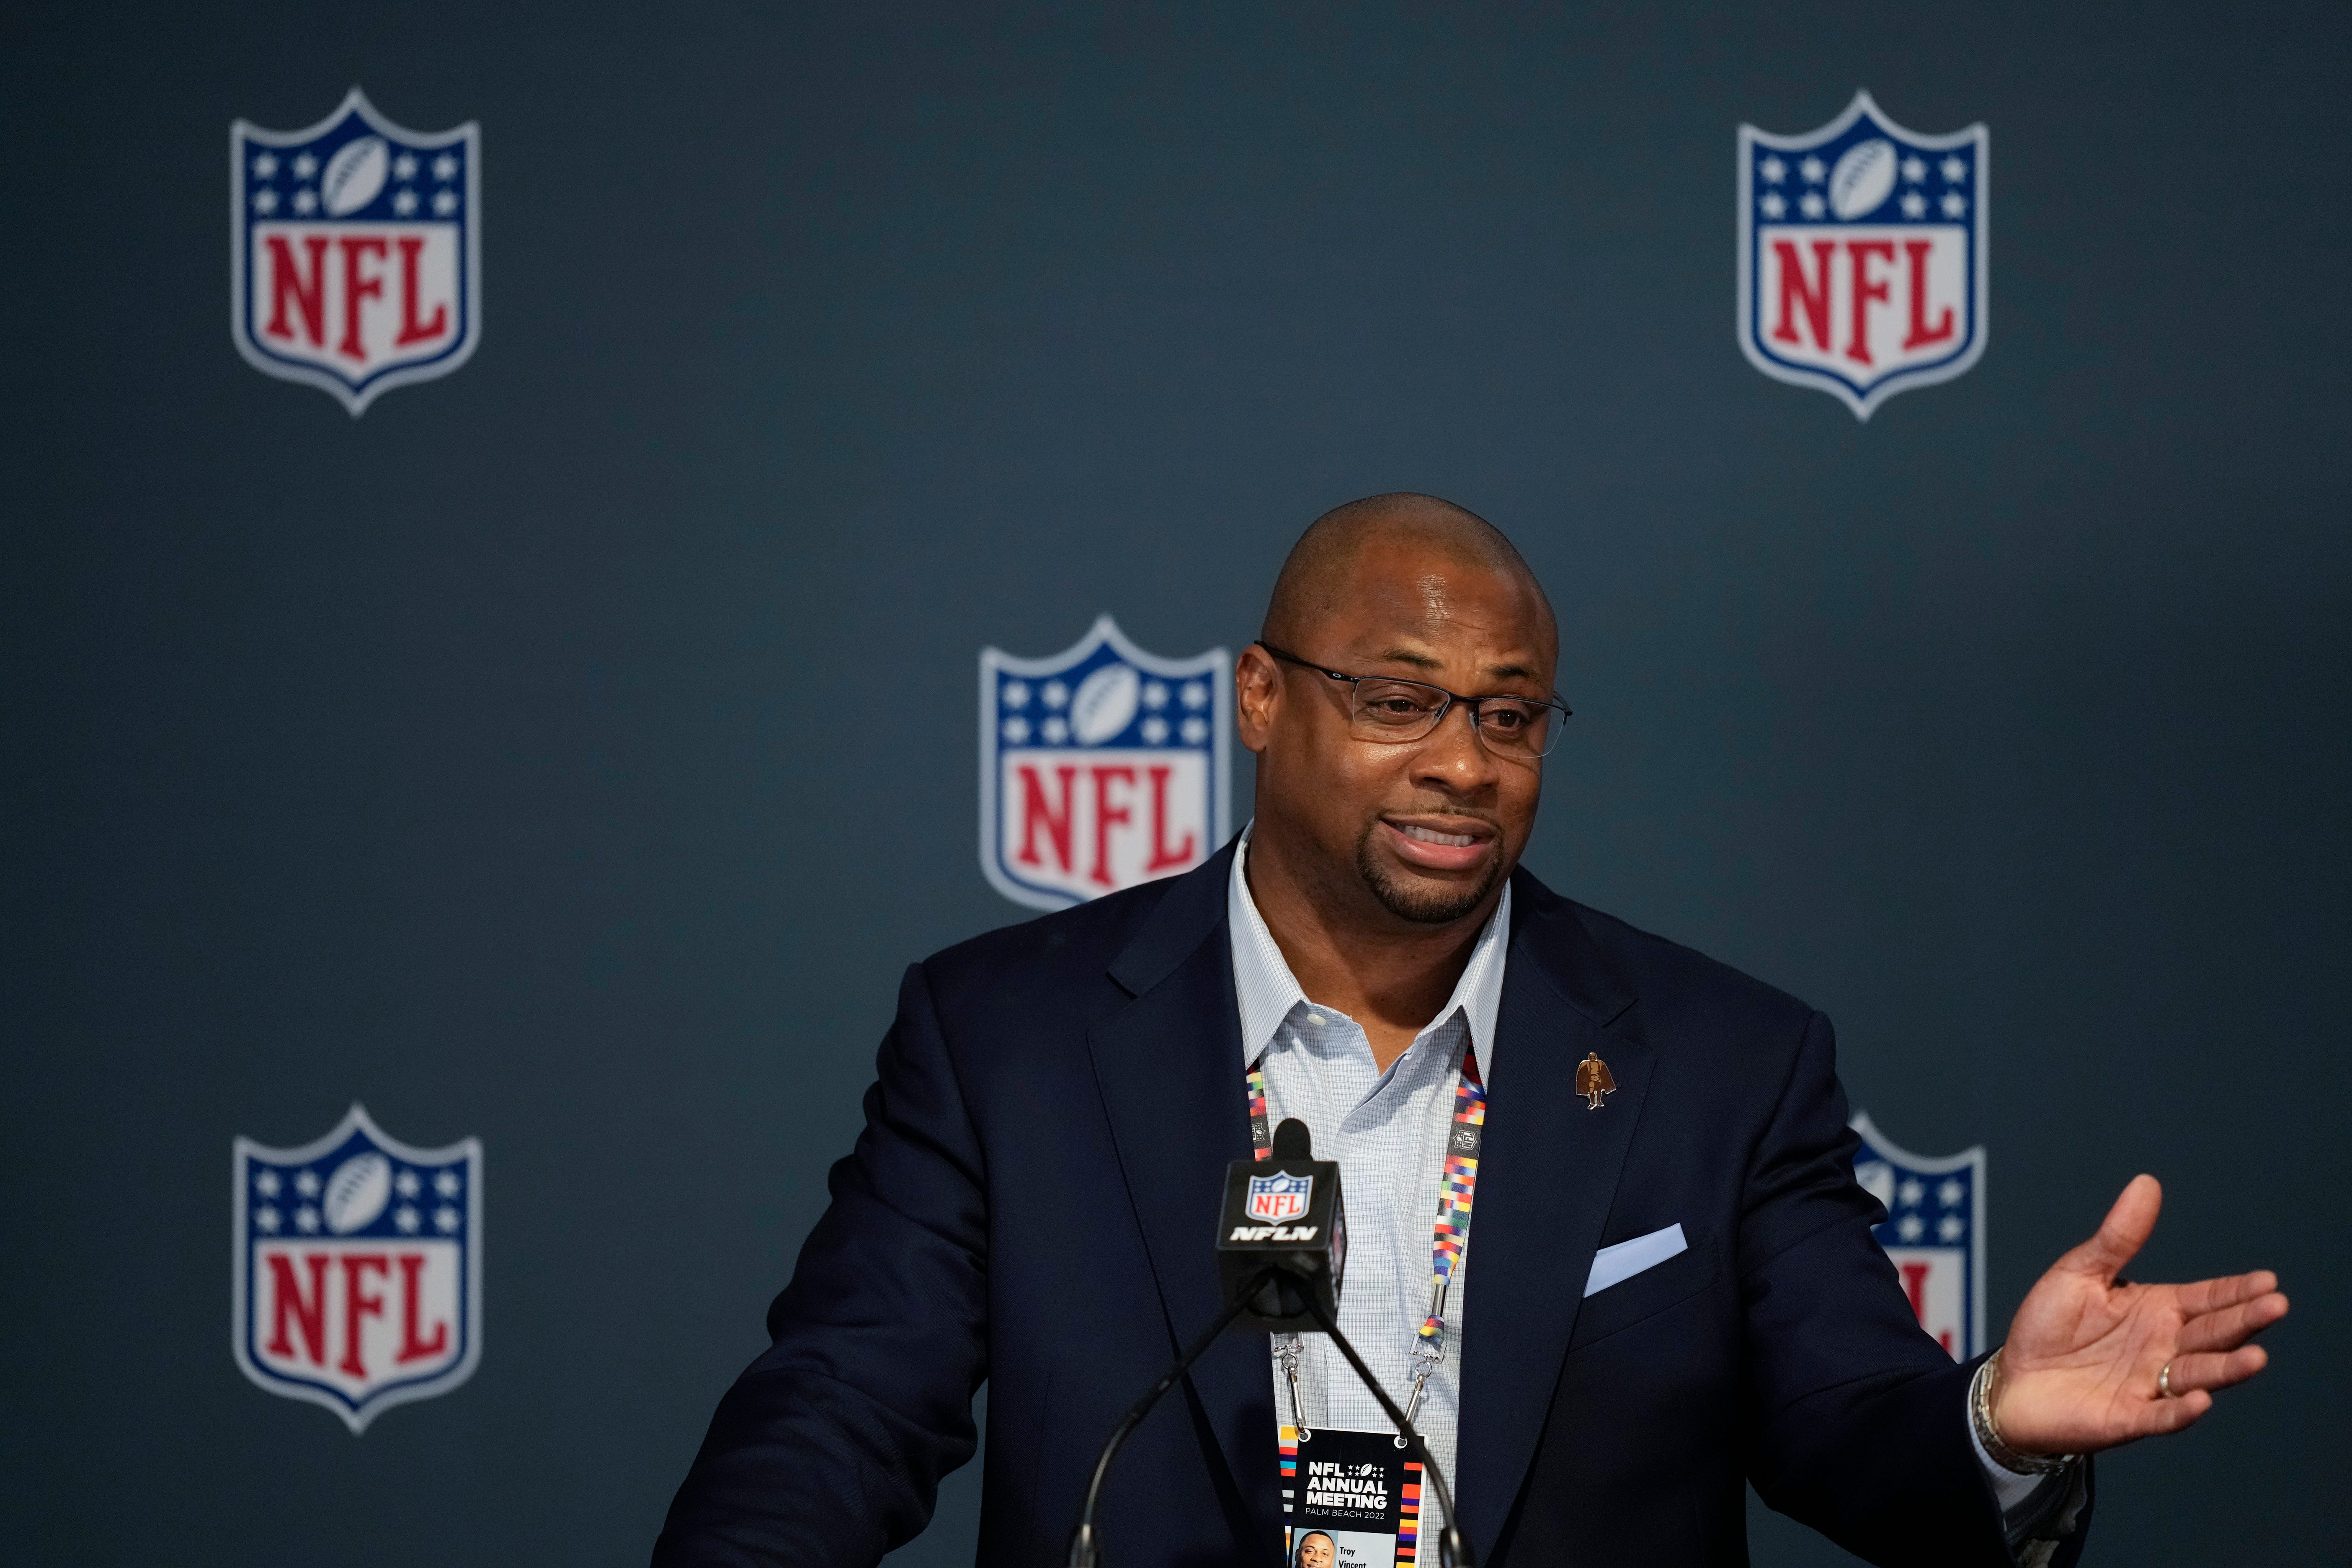 Troy Vincent, the NFL's executive vice president of football operations, has been on the front lines of trying to improve diversity in the NFL.